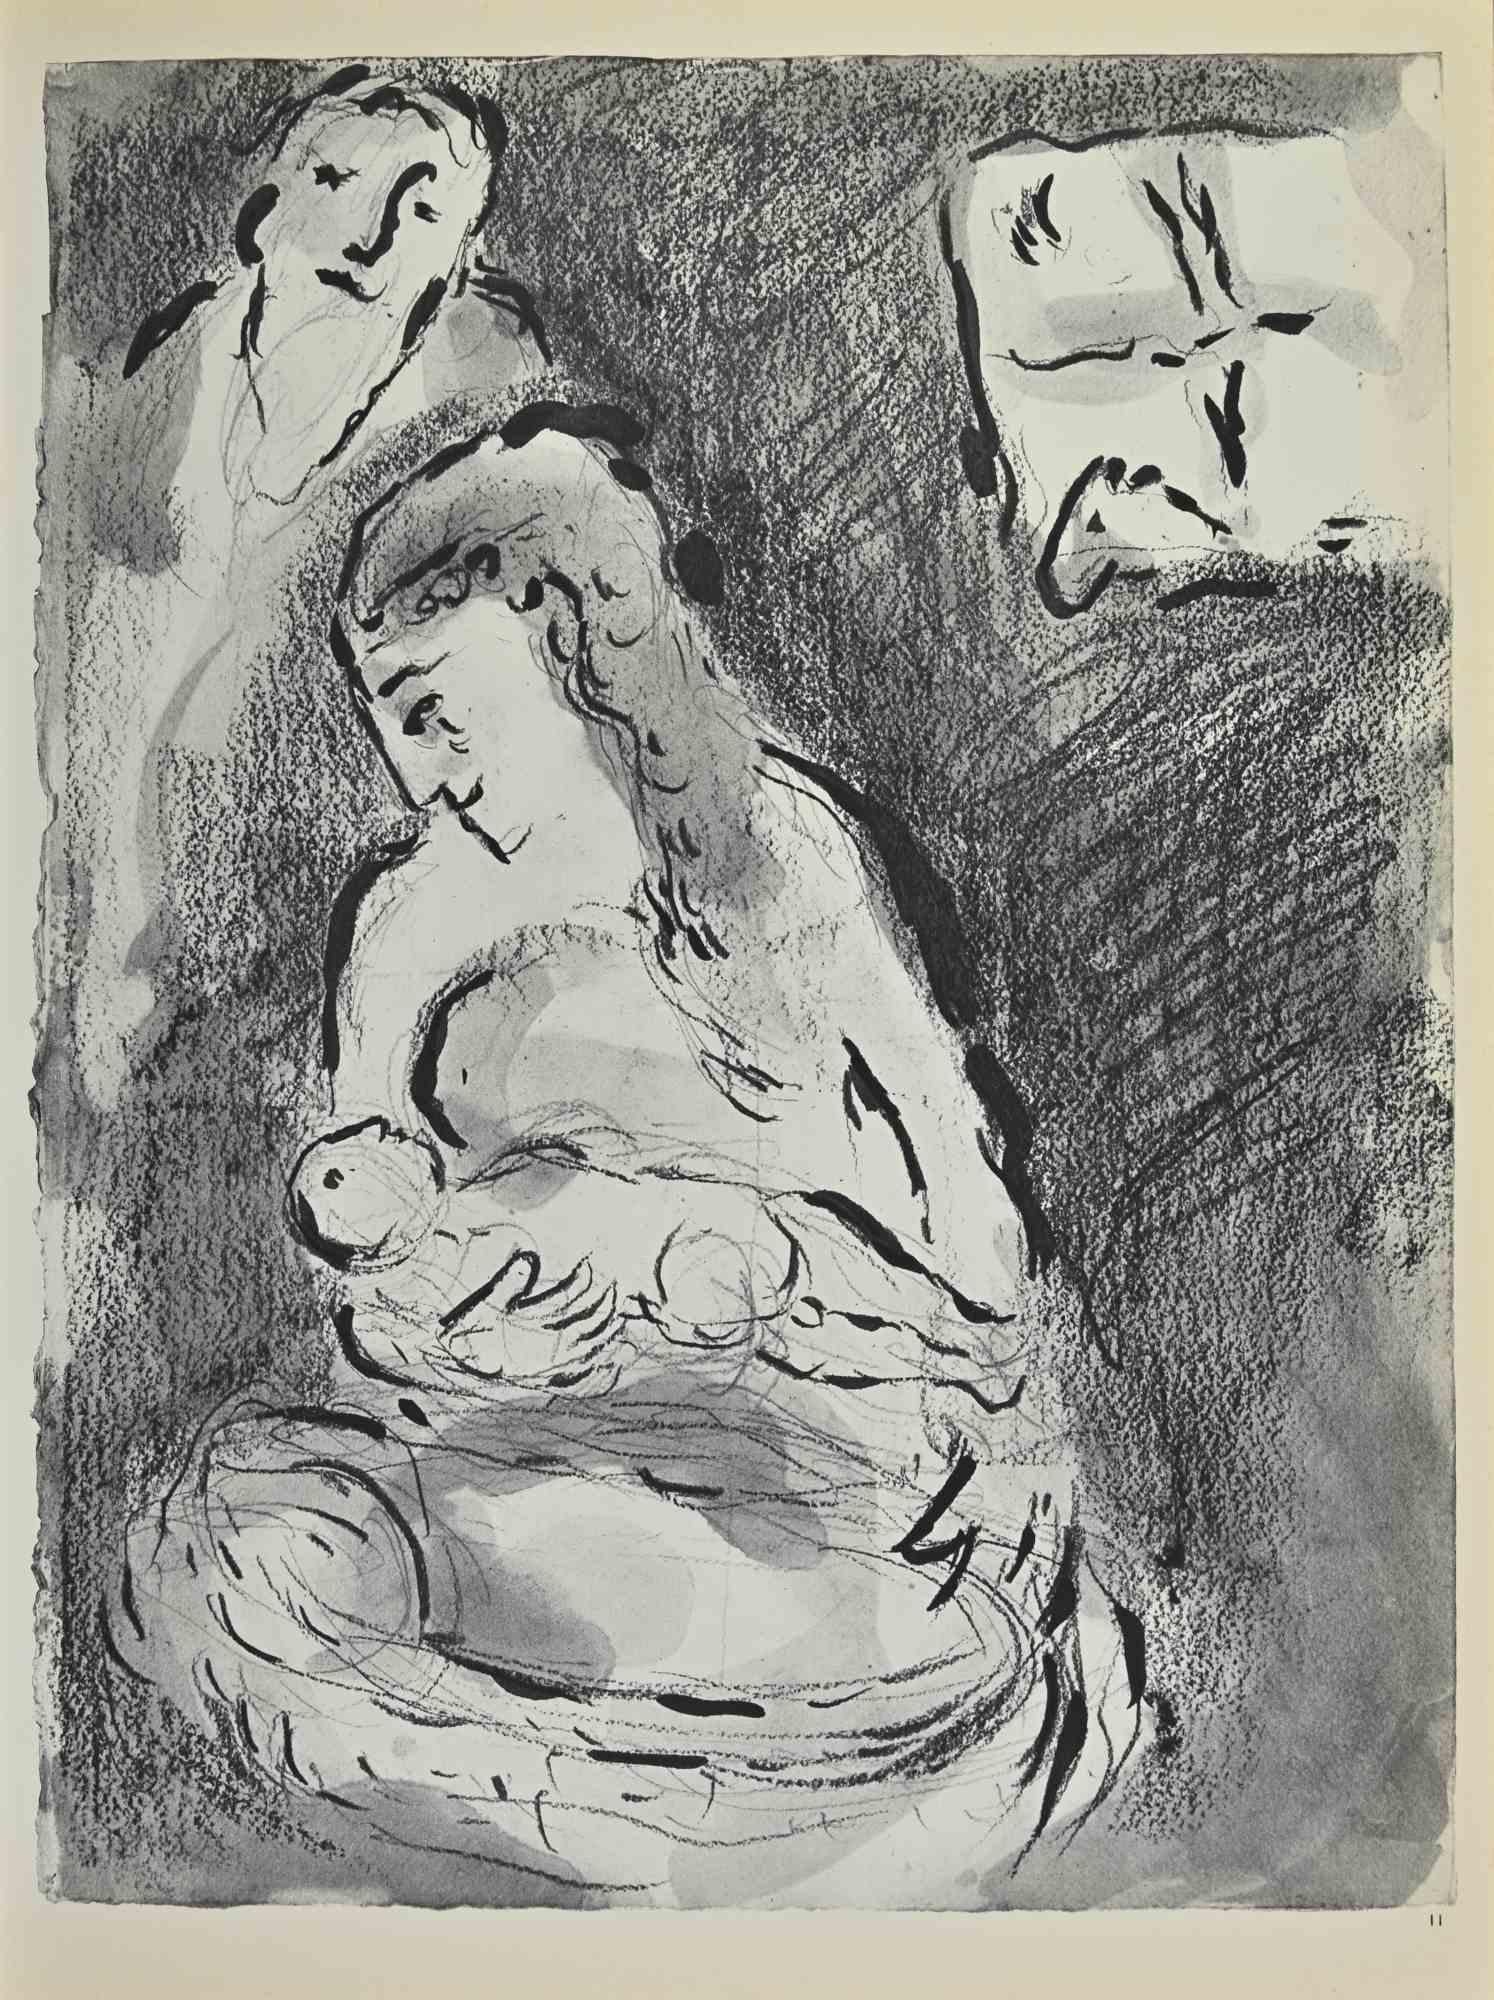 Sarah and Hagar is an artwork realized by March Chagall, 1960s.

Lithograph on brown-toned paper, no signature.

Lithograph on both sheets.

Edition of 6500 unsigned lithographs. Printed by Mourlot and published by Tériade, Paris.

Ref. Mourlot, F.,